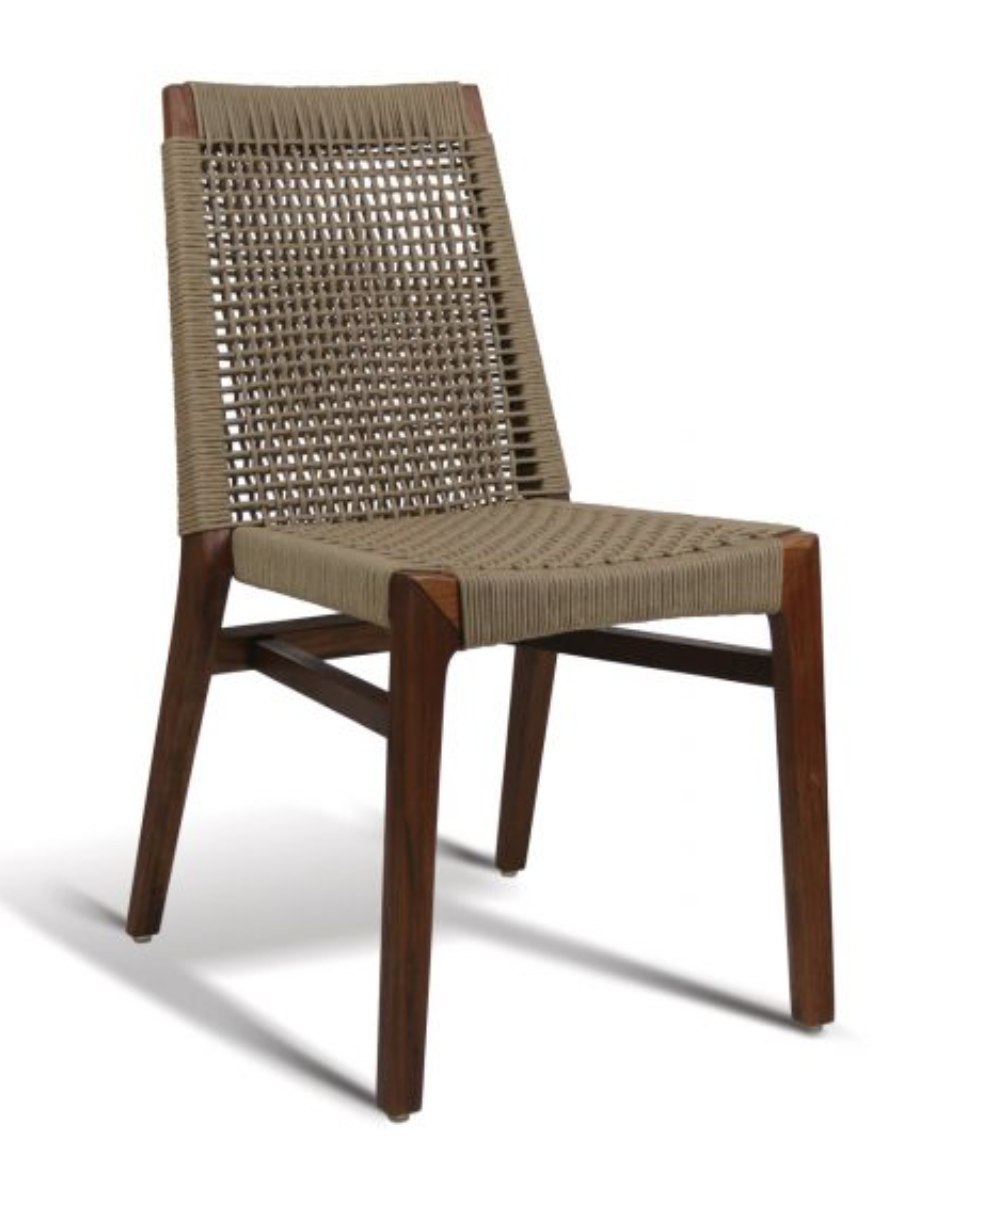 https://outdoorrestaurantseating.com/images/stories/virtuemart/product/GAR%20PRoducts%20side%20chair%20Lure%20%20front%20angle%20latte.png